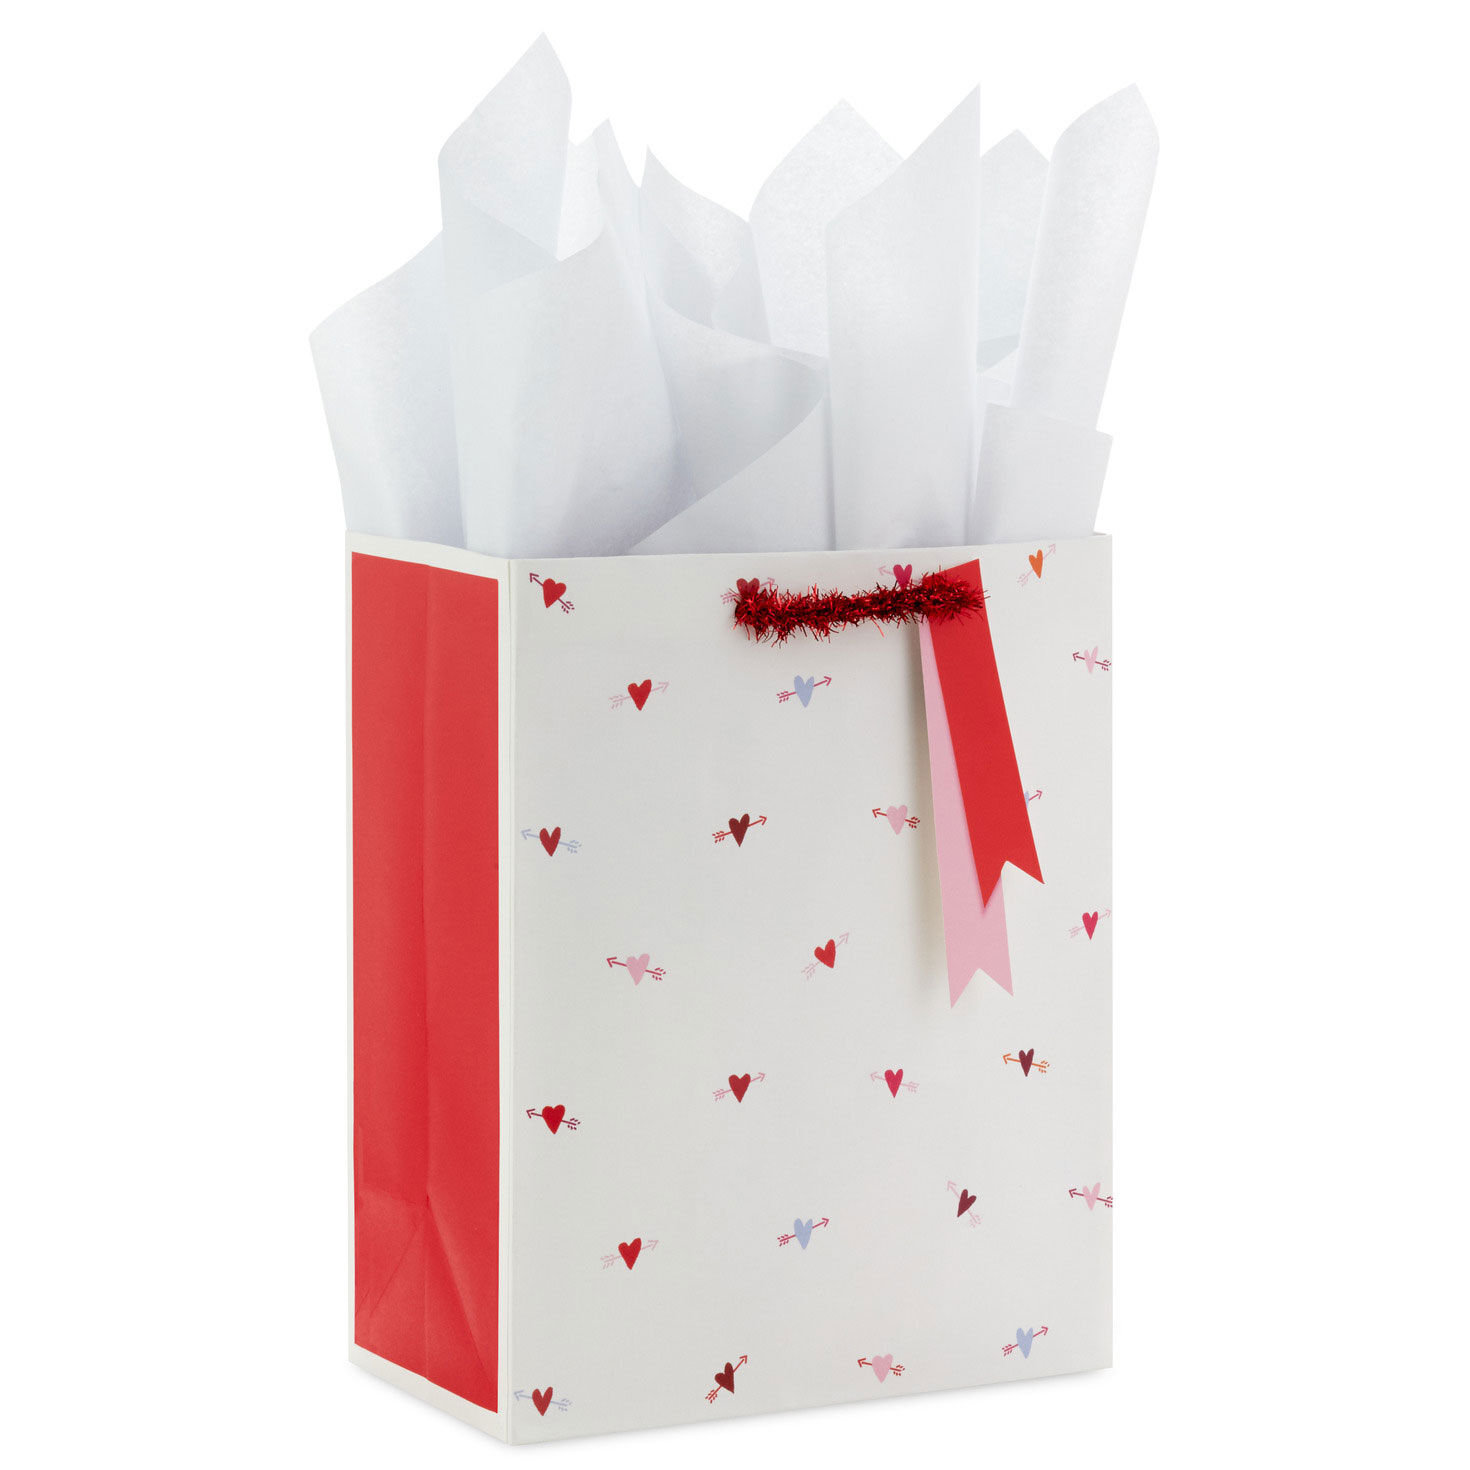 9.6 Tiny Hearts Medium Valentine's Day Gift Bag With Tissue Paper - Gift  Bags - Hallmark